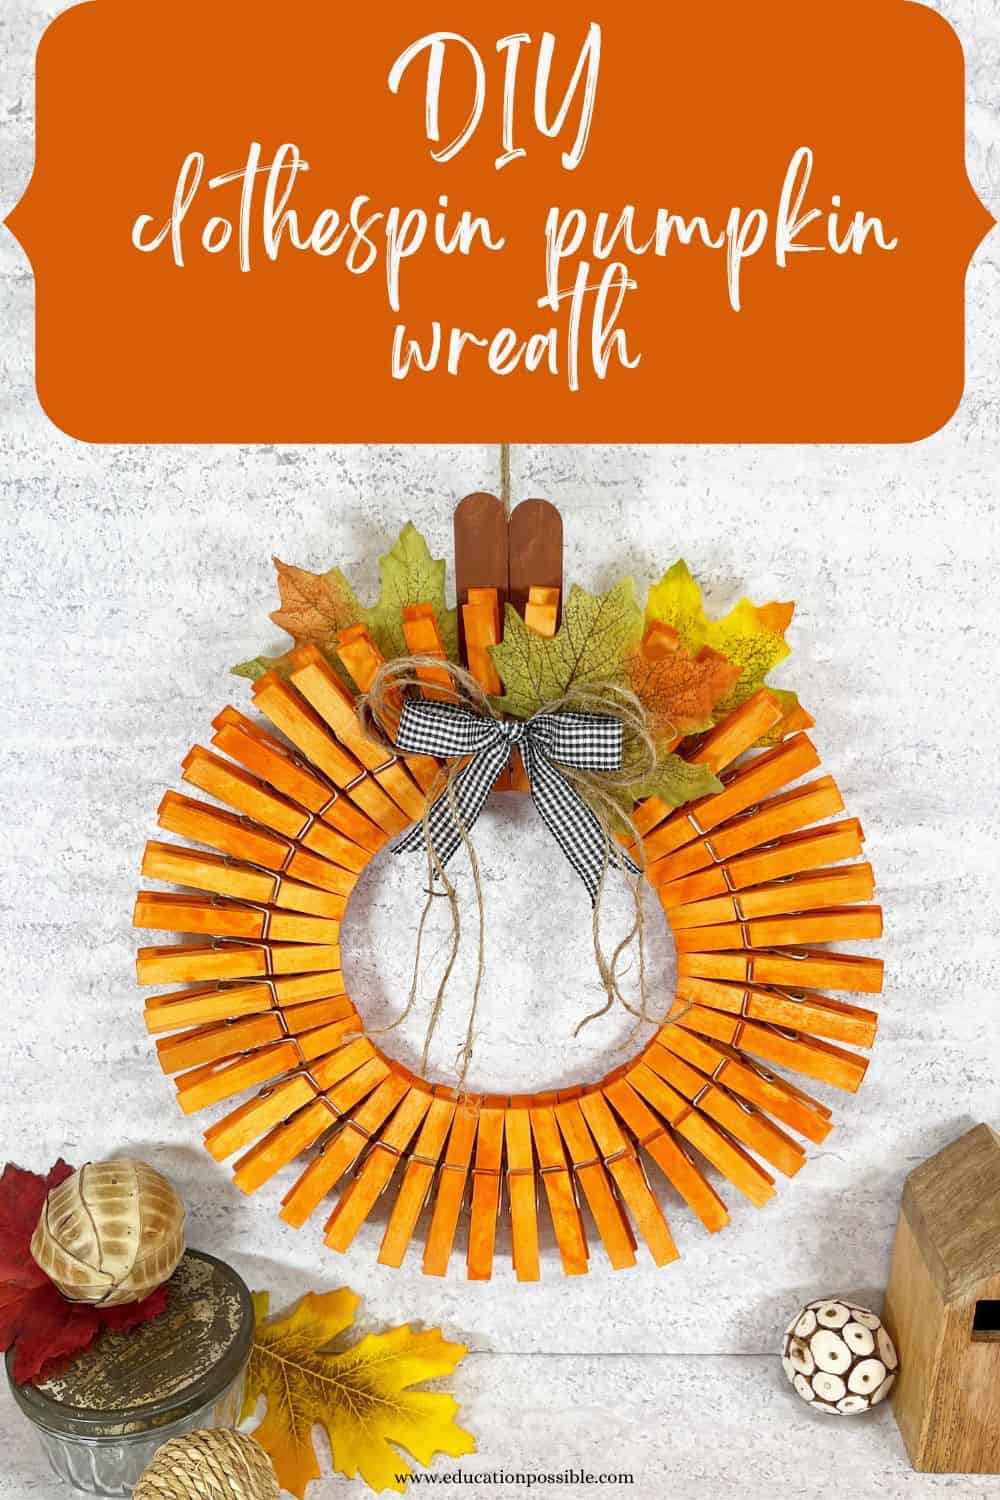 This Clothespin Pumpkin Wreath is an Easy Craft for Tweens